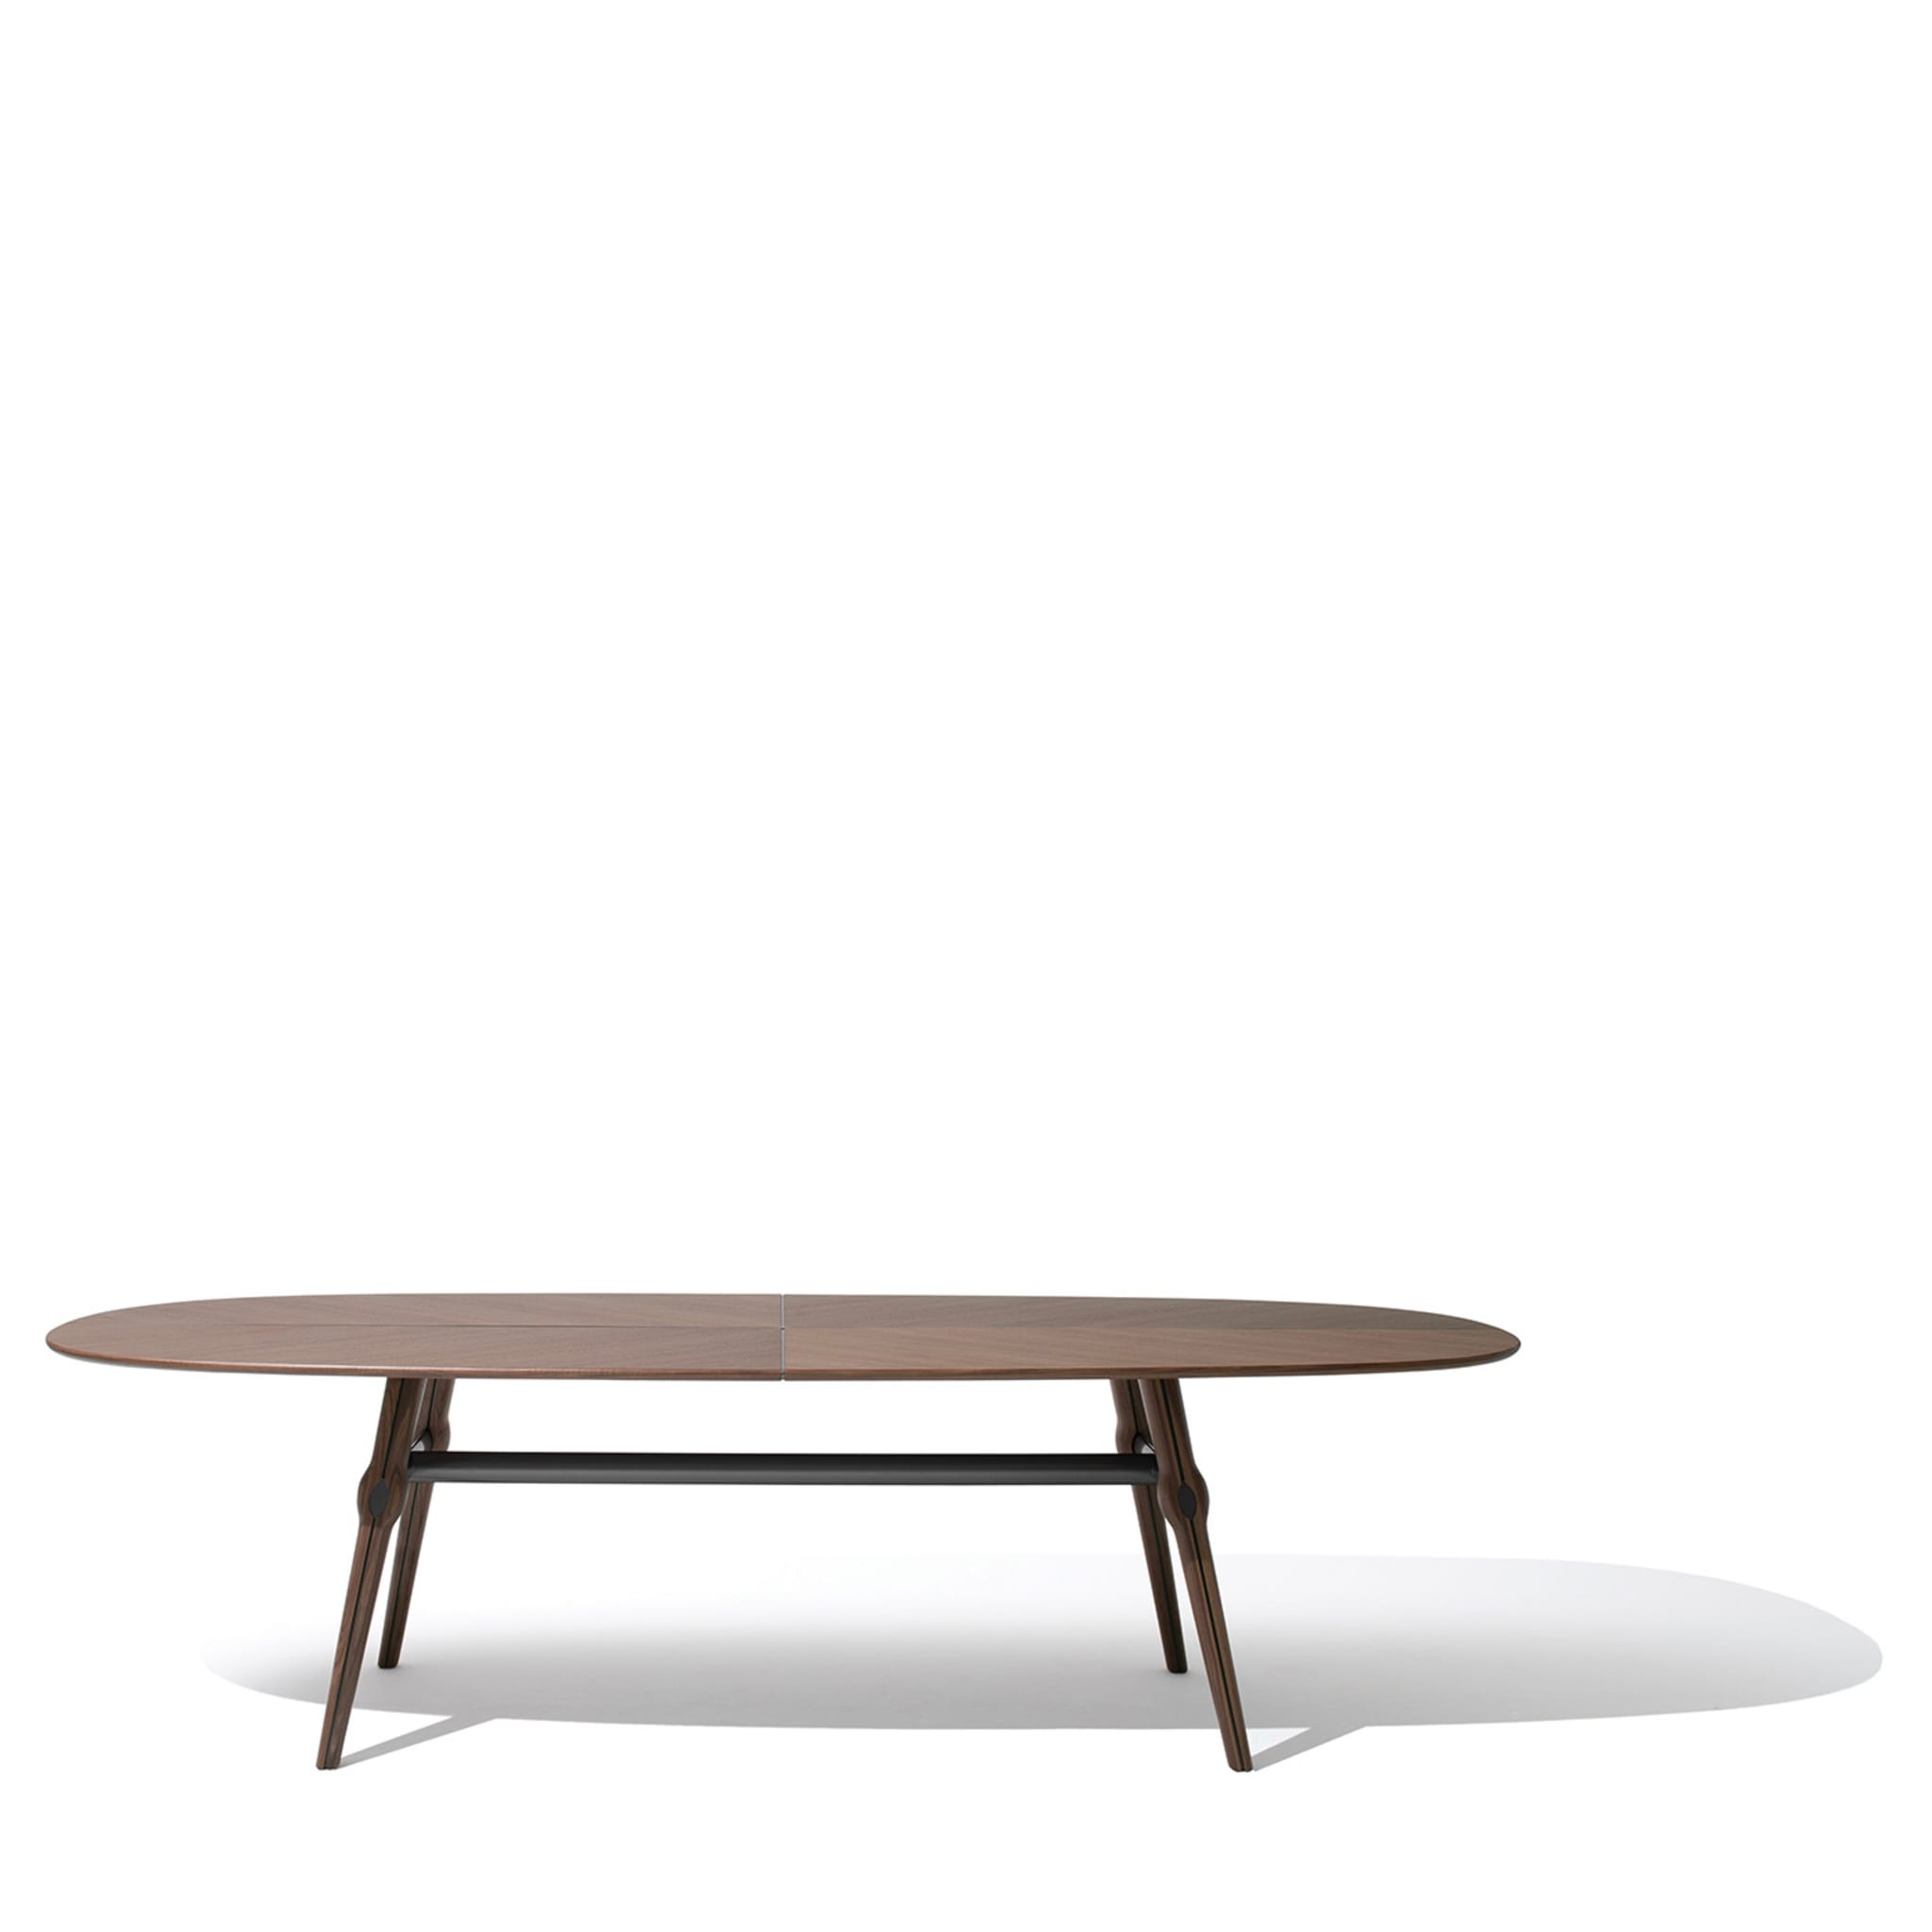 Ago Canaletto Walnut Dining Table - Alternative view 1